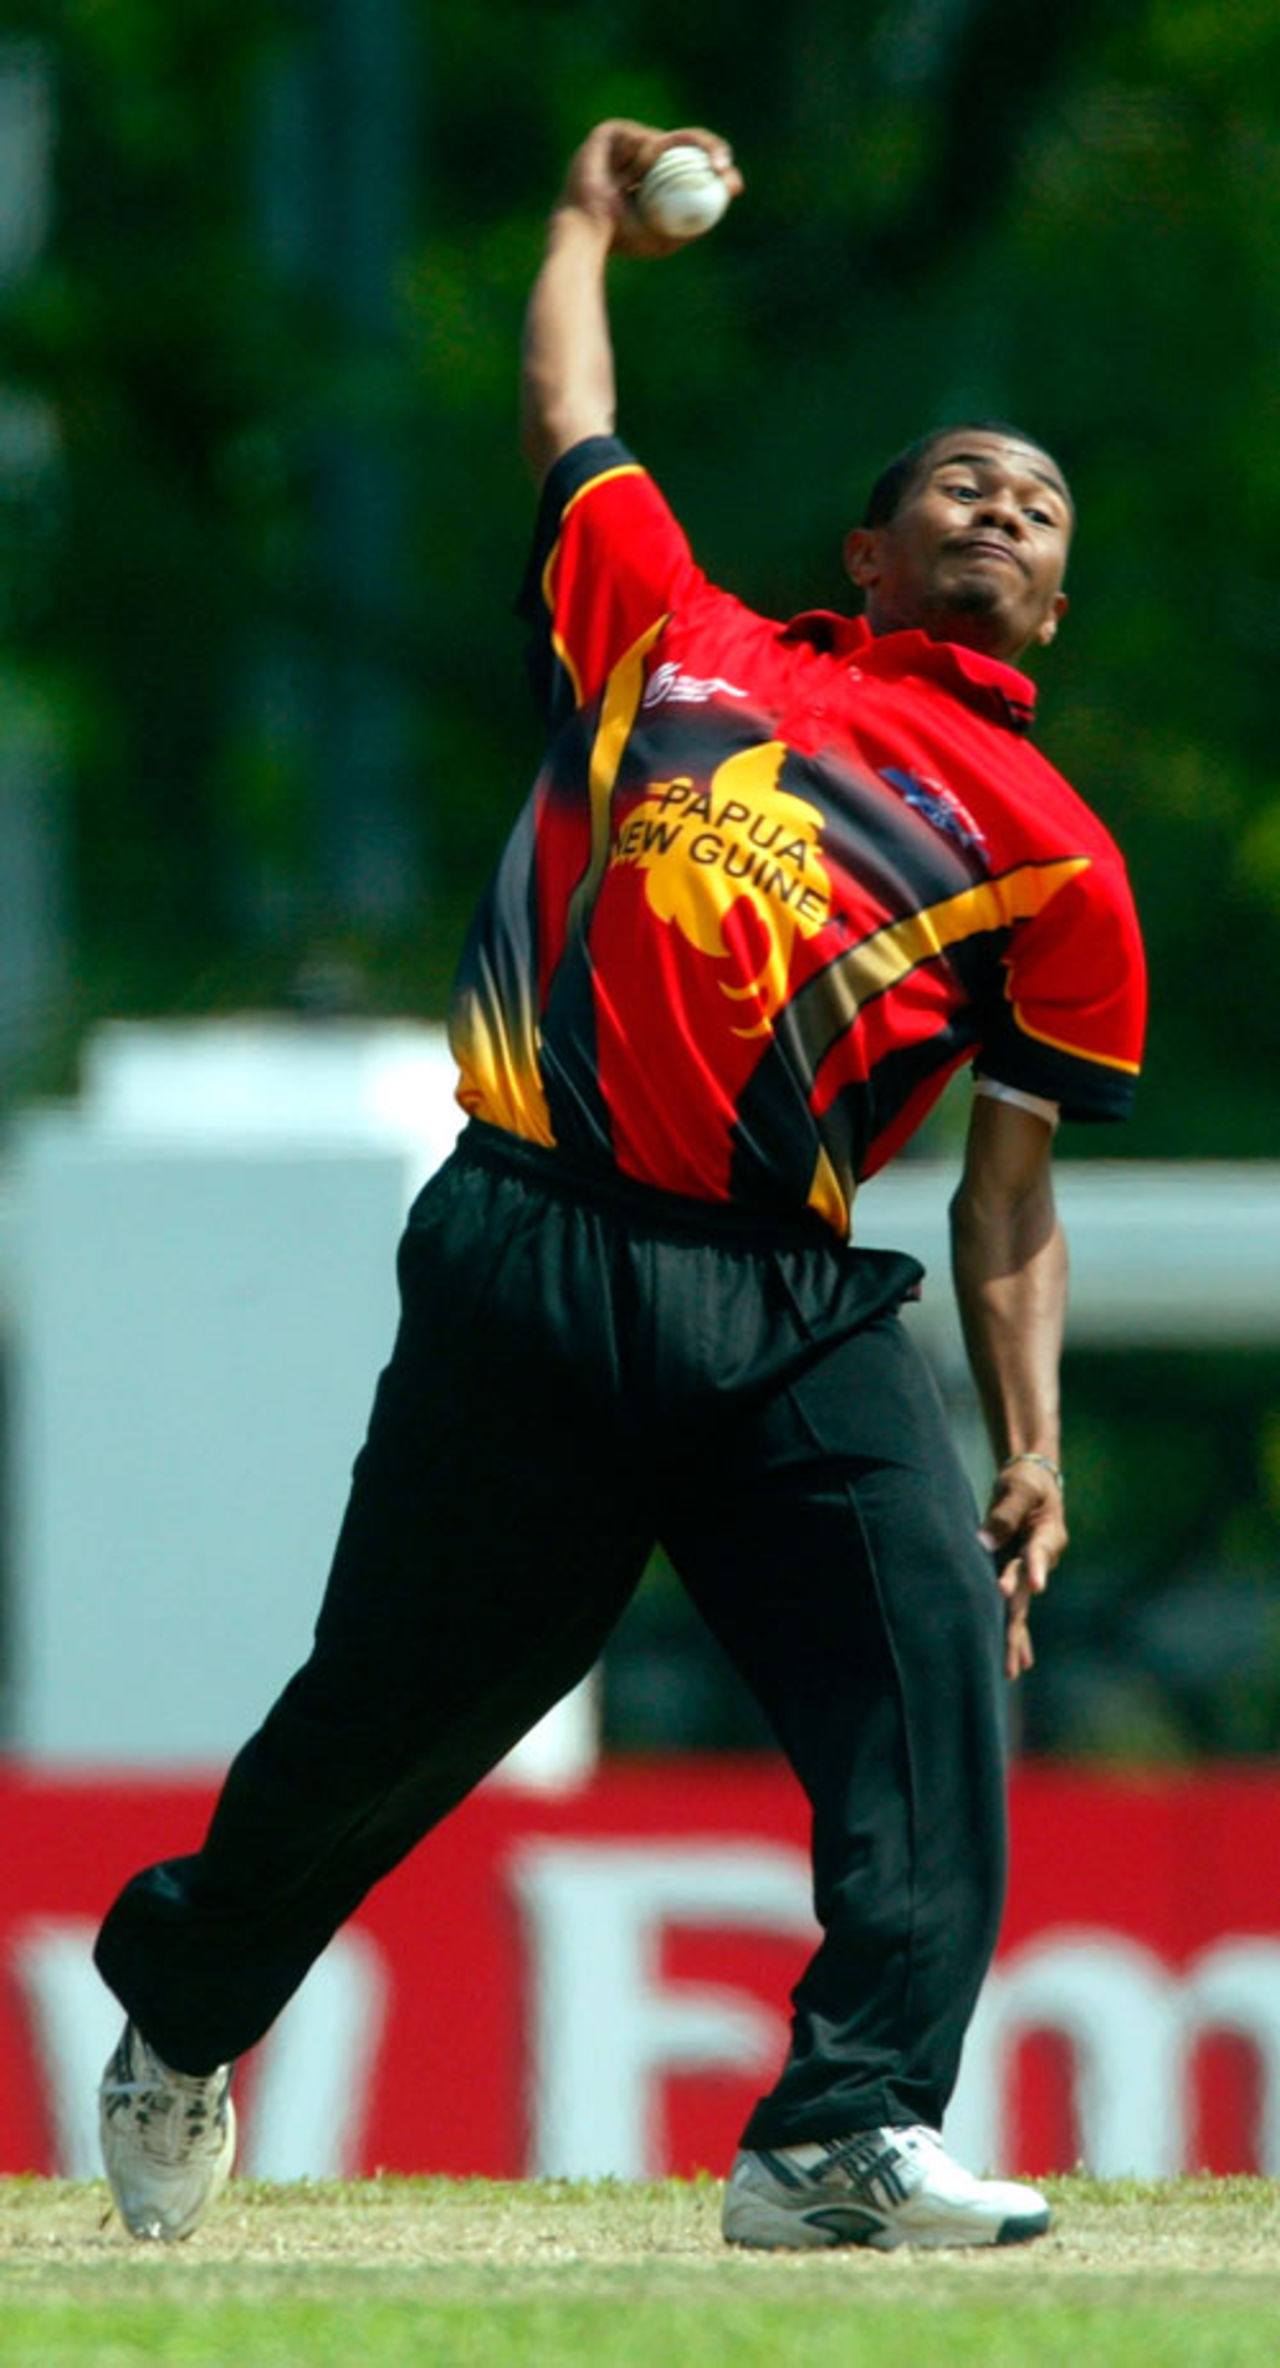 Colin Amini turns his arm over, Papua New Guinea Under-19s v West Indies Under-19s, Under-19 World Cup, Kuala Lumpur, February 20, 2008